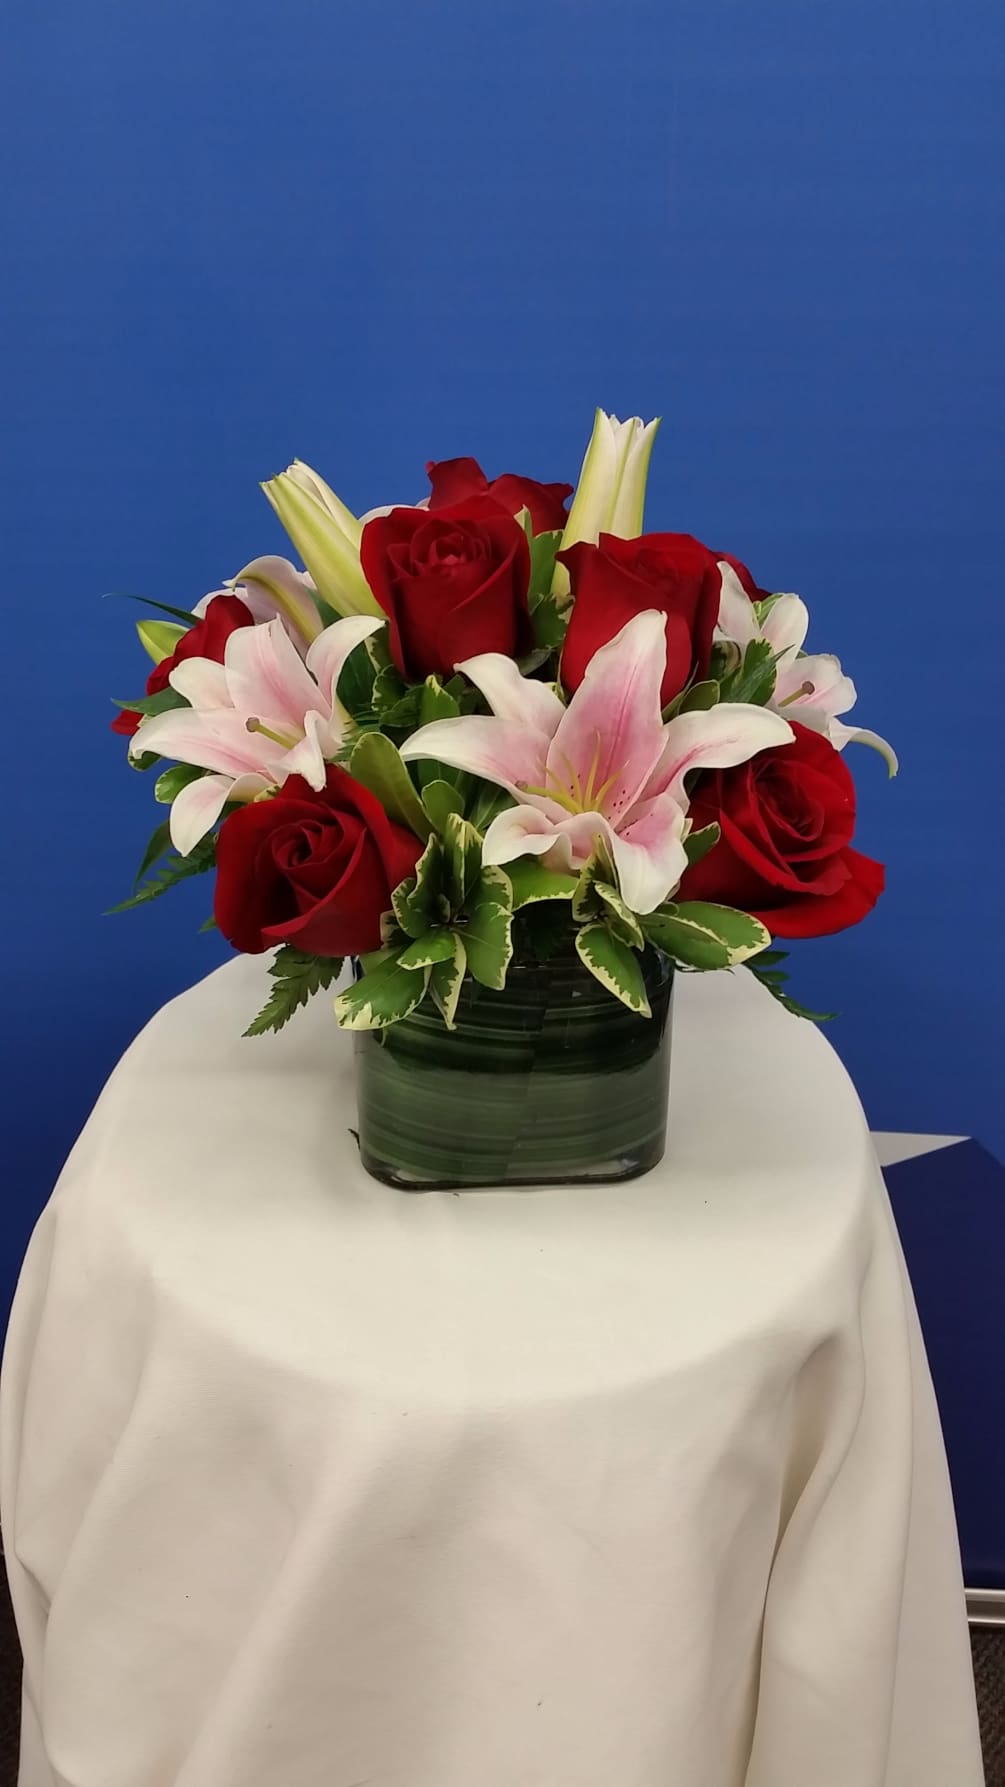 This wonderful mix of flowers makes for an extra special gift for